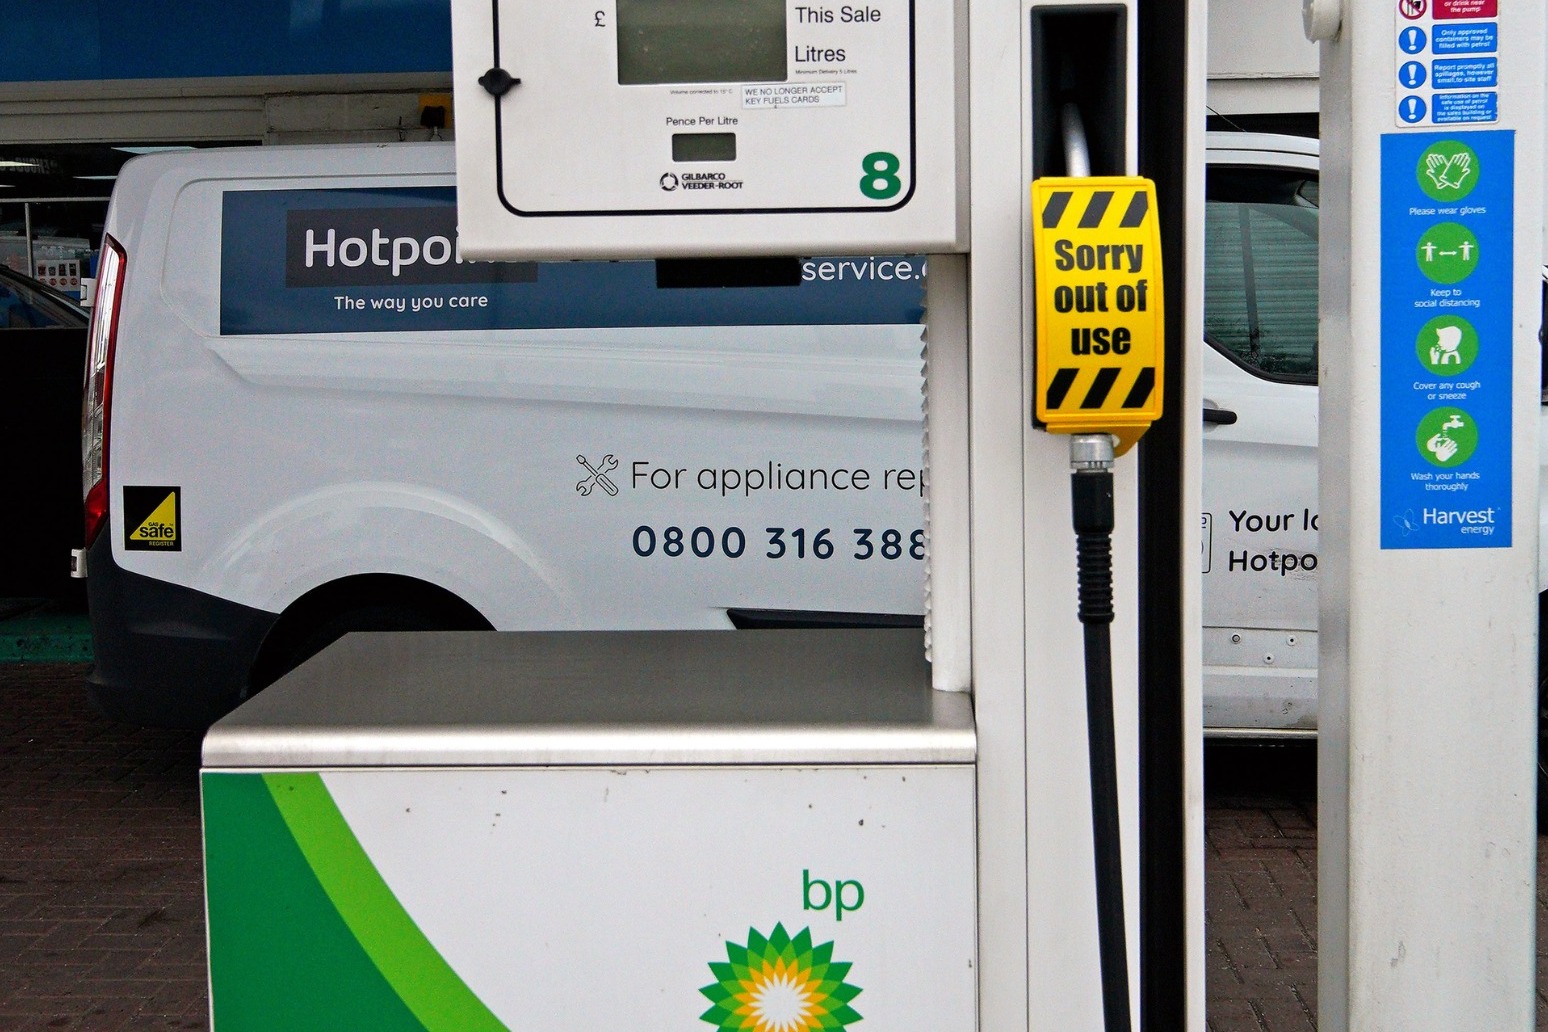 BP to ration fuel deliveries to forecourts due to HGV driver shortages 